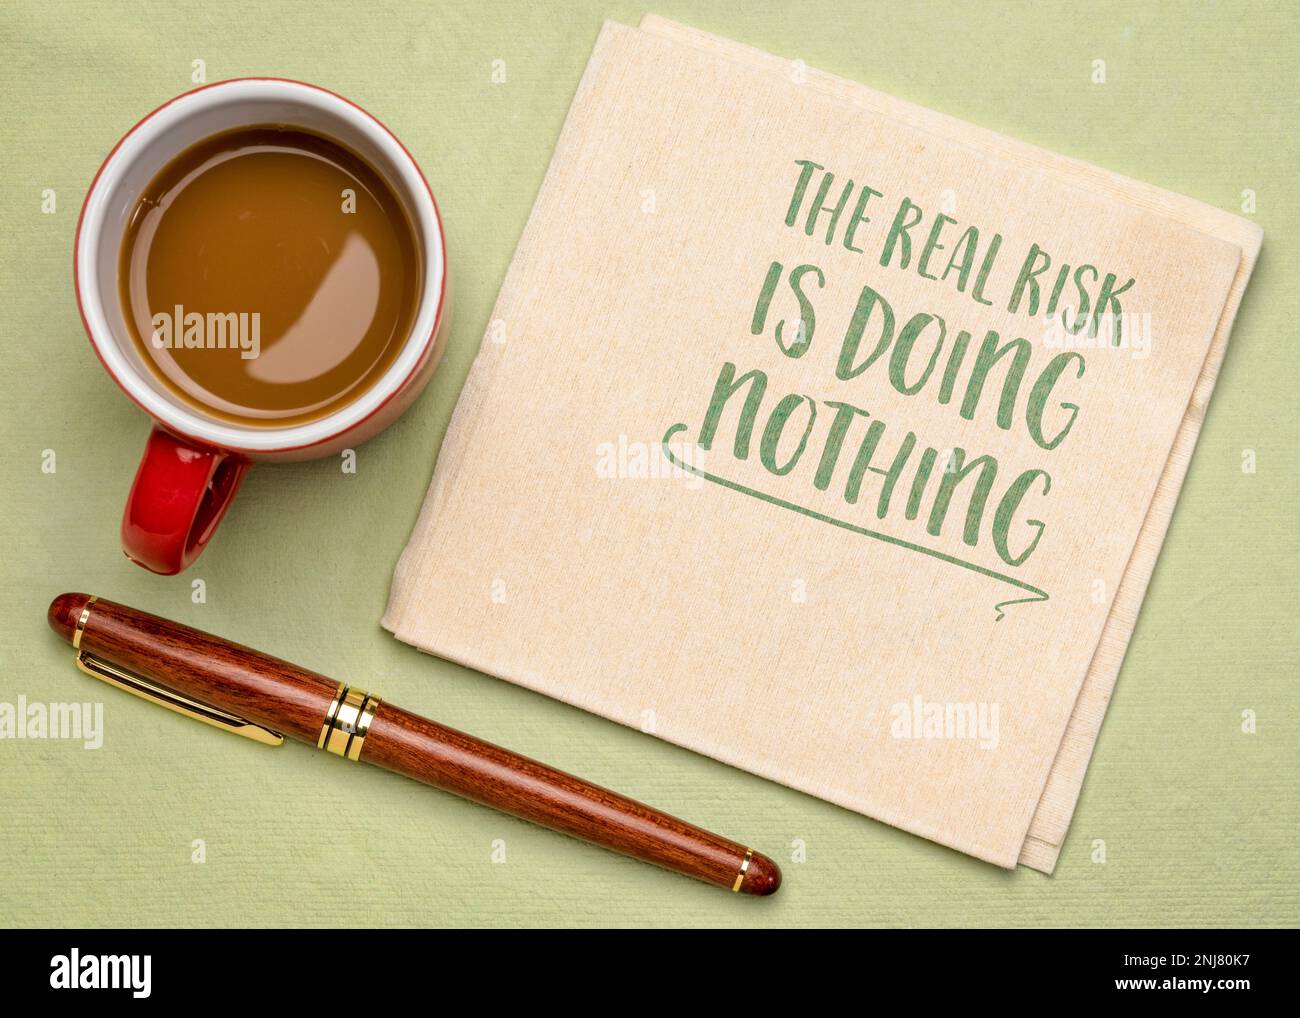 the real risk is doing nothing - inspirational reminder, procrastination and personal development concept Stock Photo